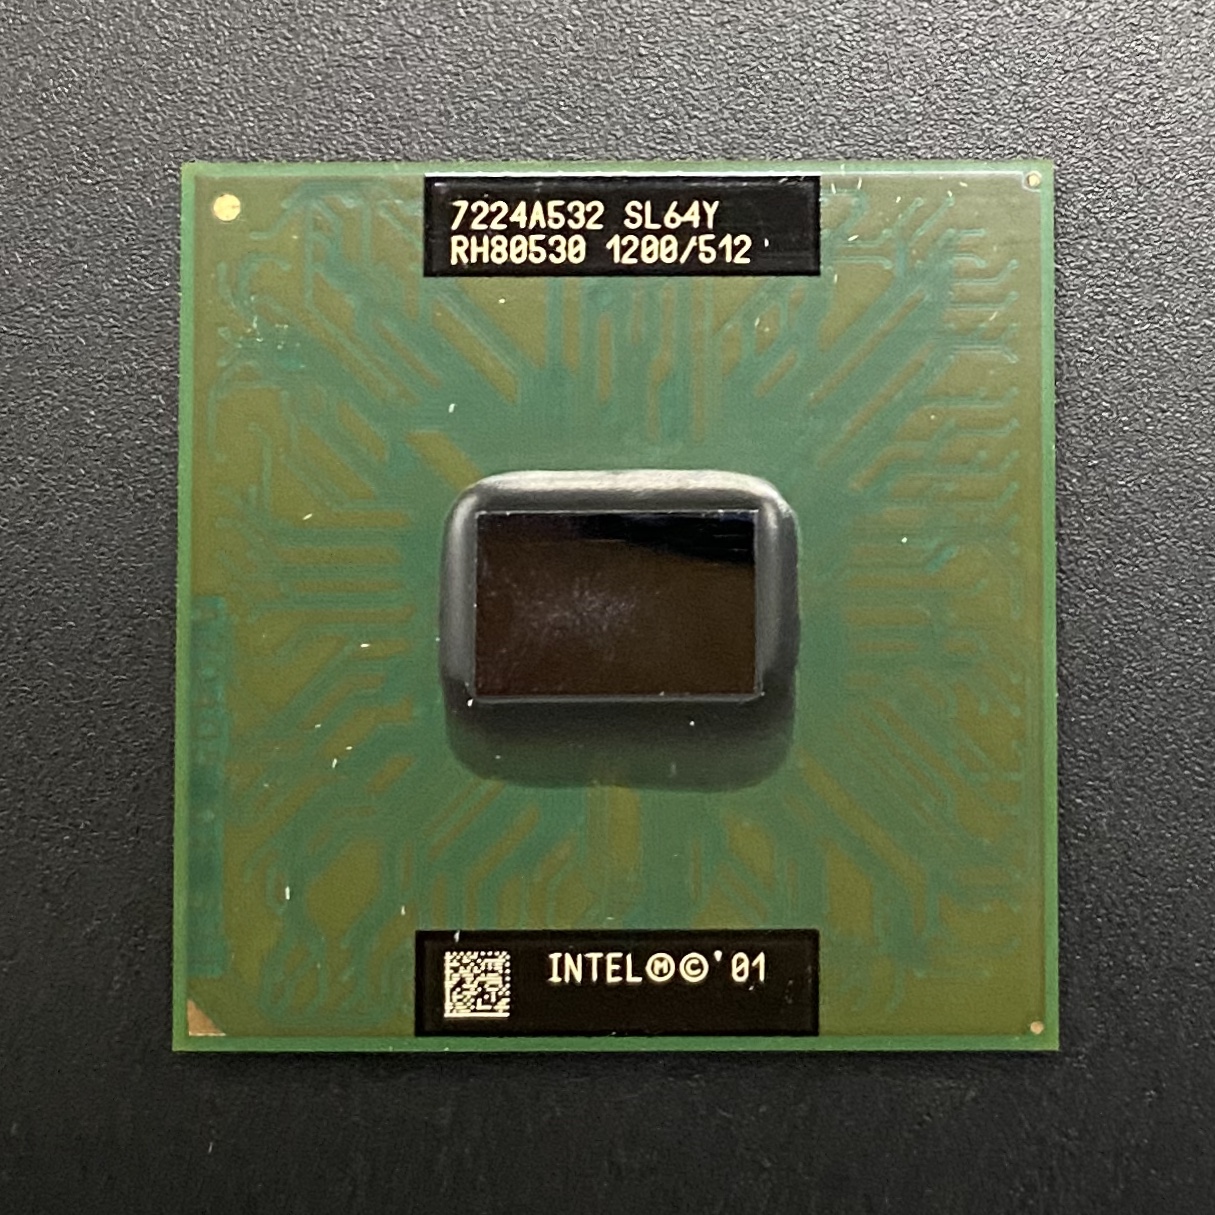 intel mobile 4 series express chipset family 8.15.10.2869